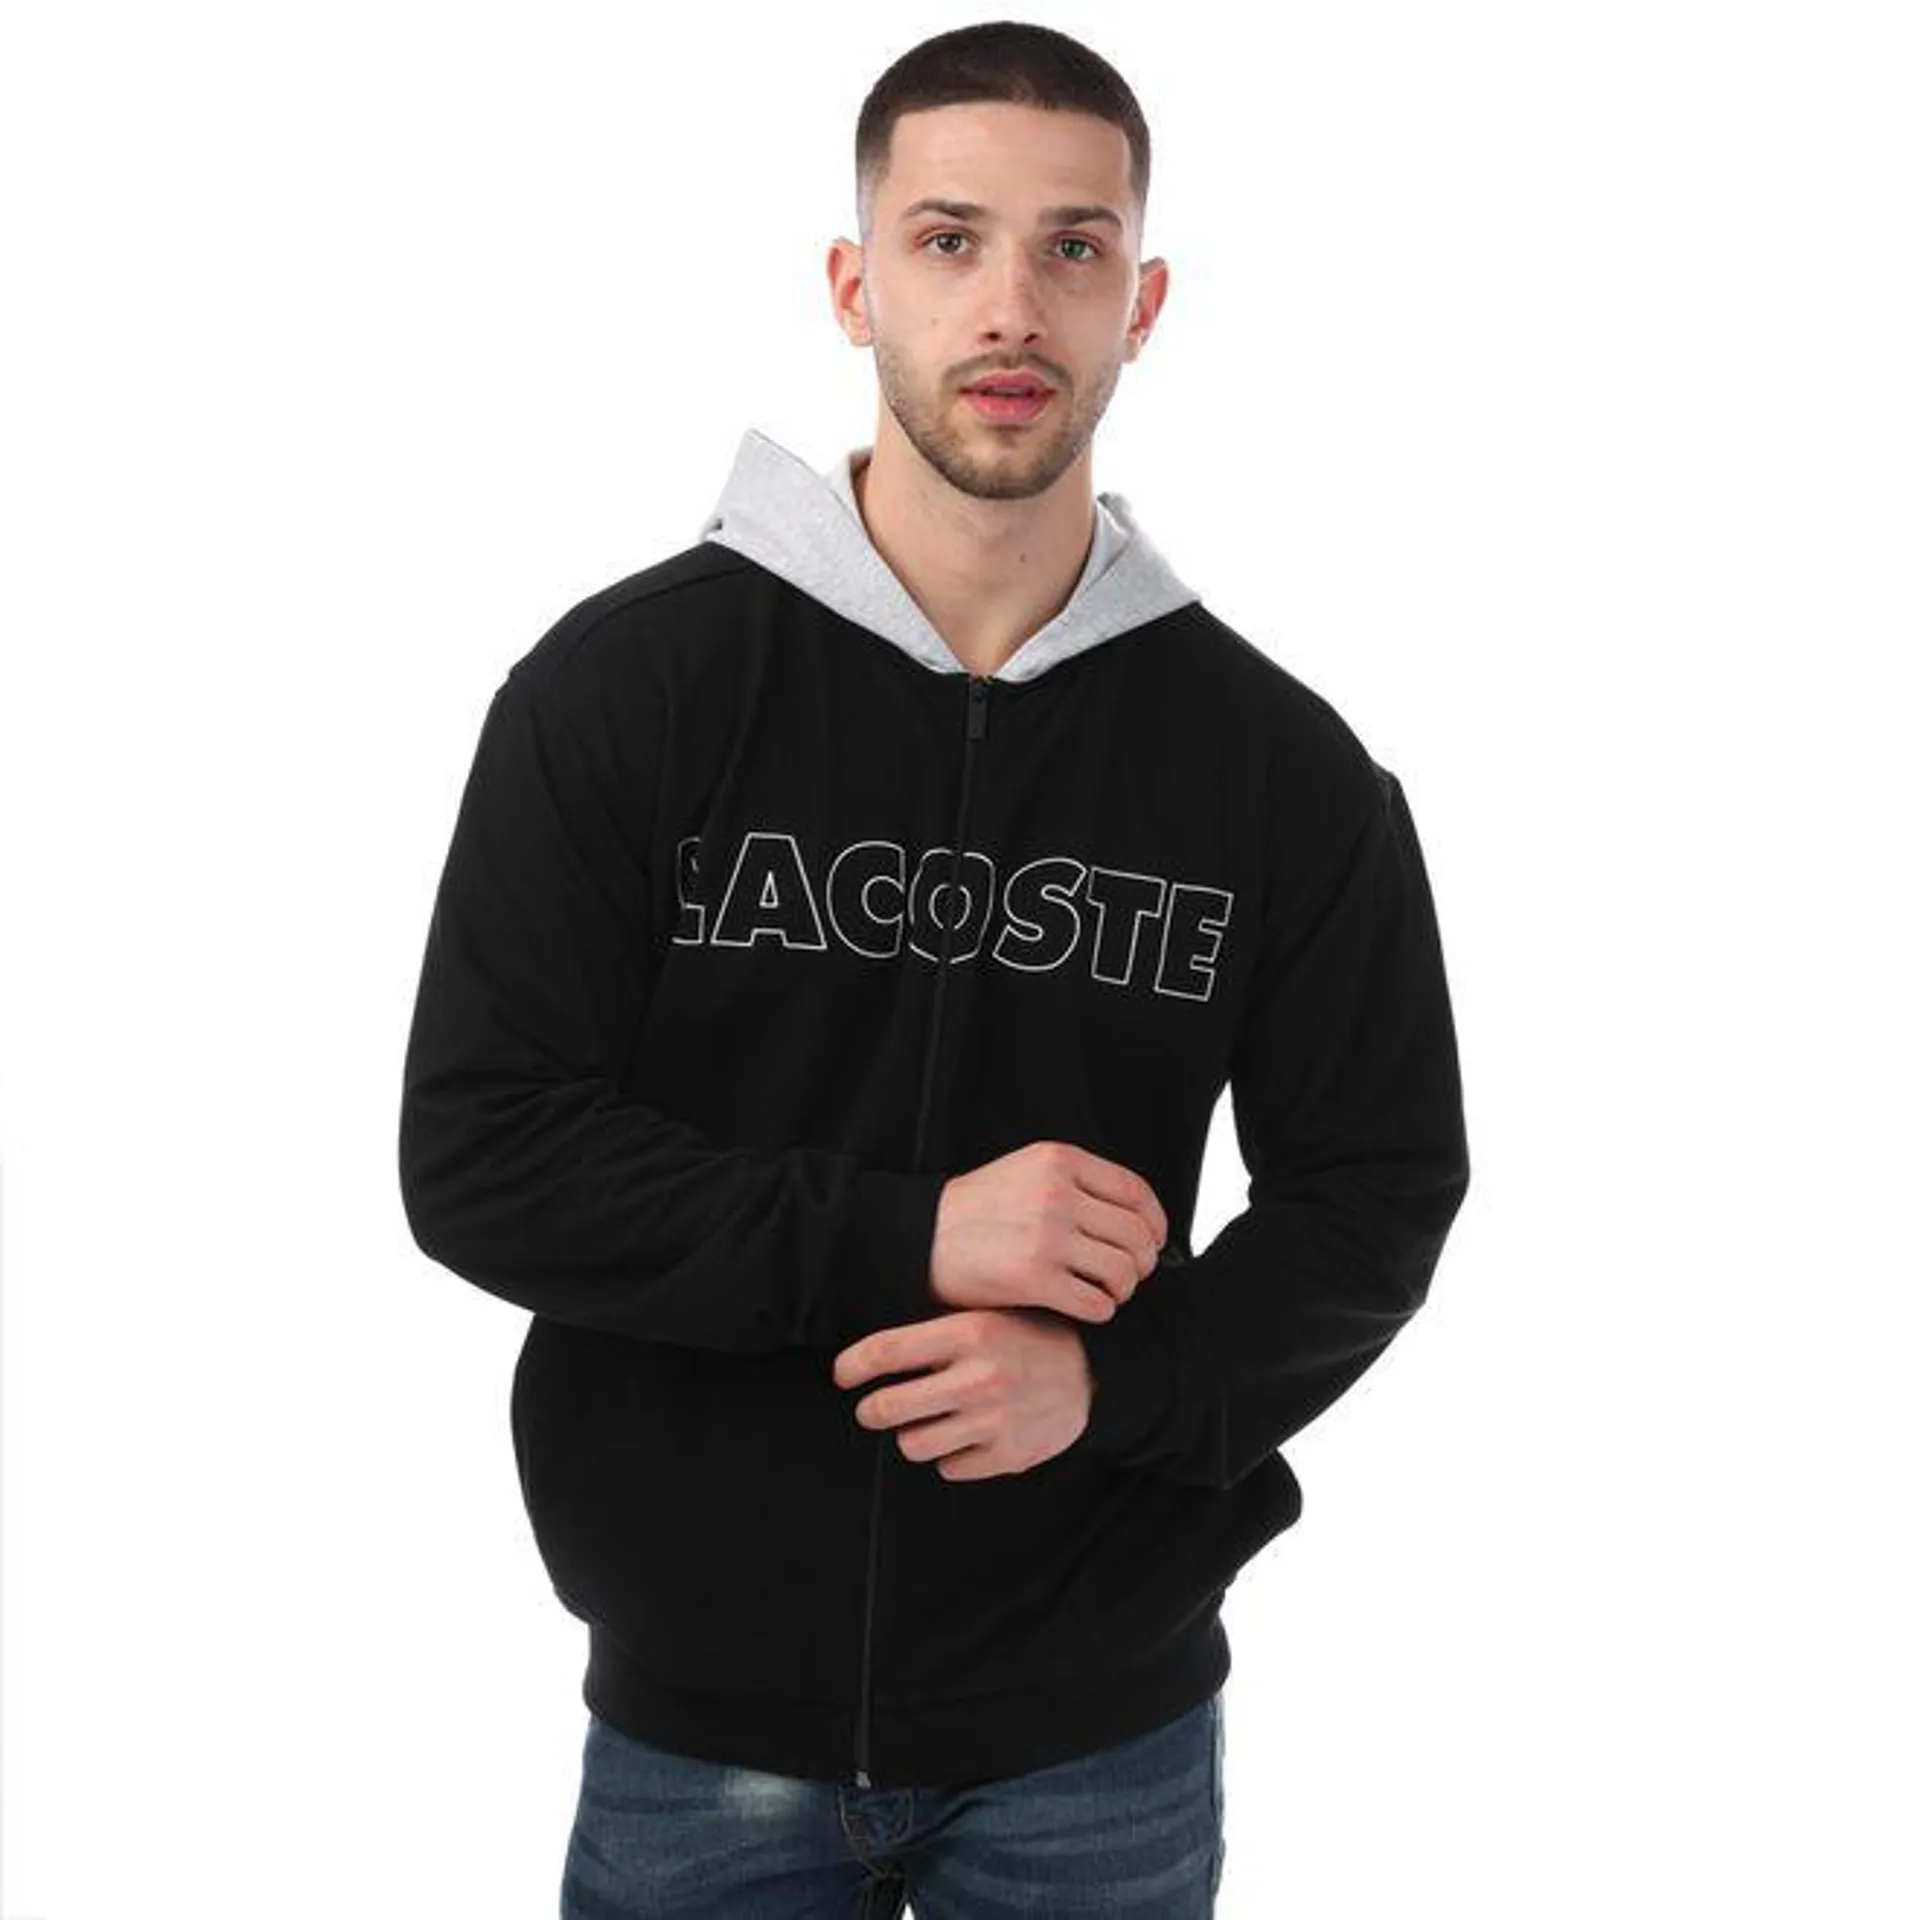 Lacoste Mens Branded Cotton Lounge Hoody in Black